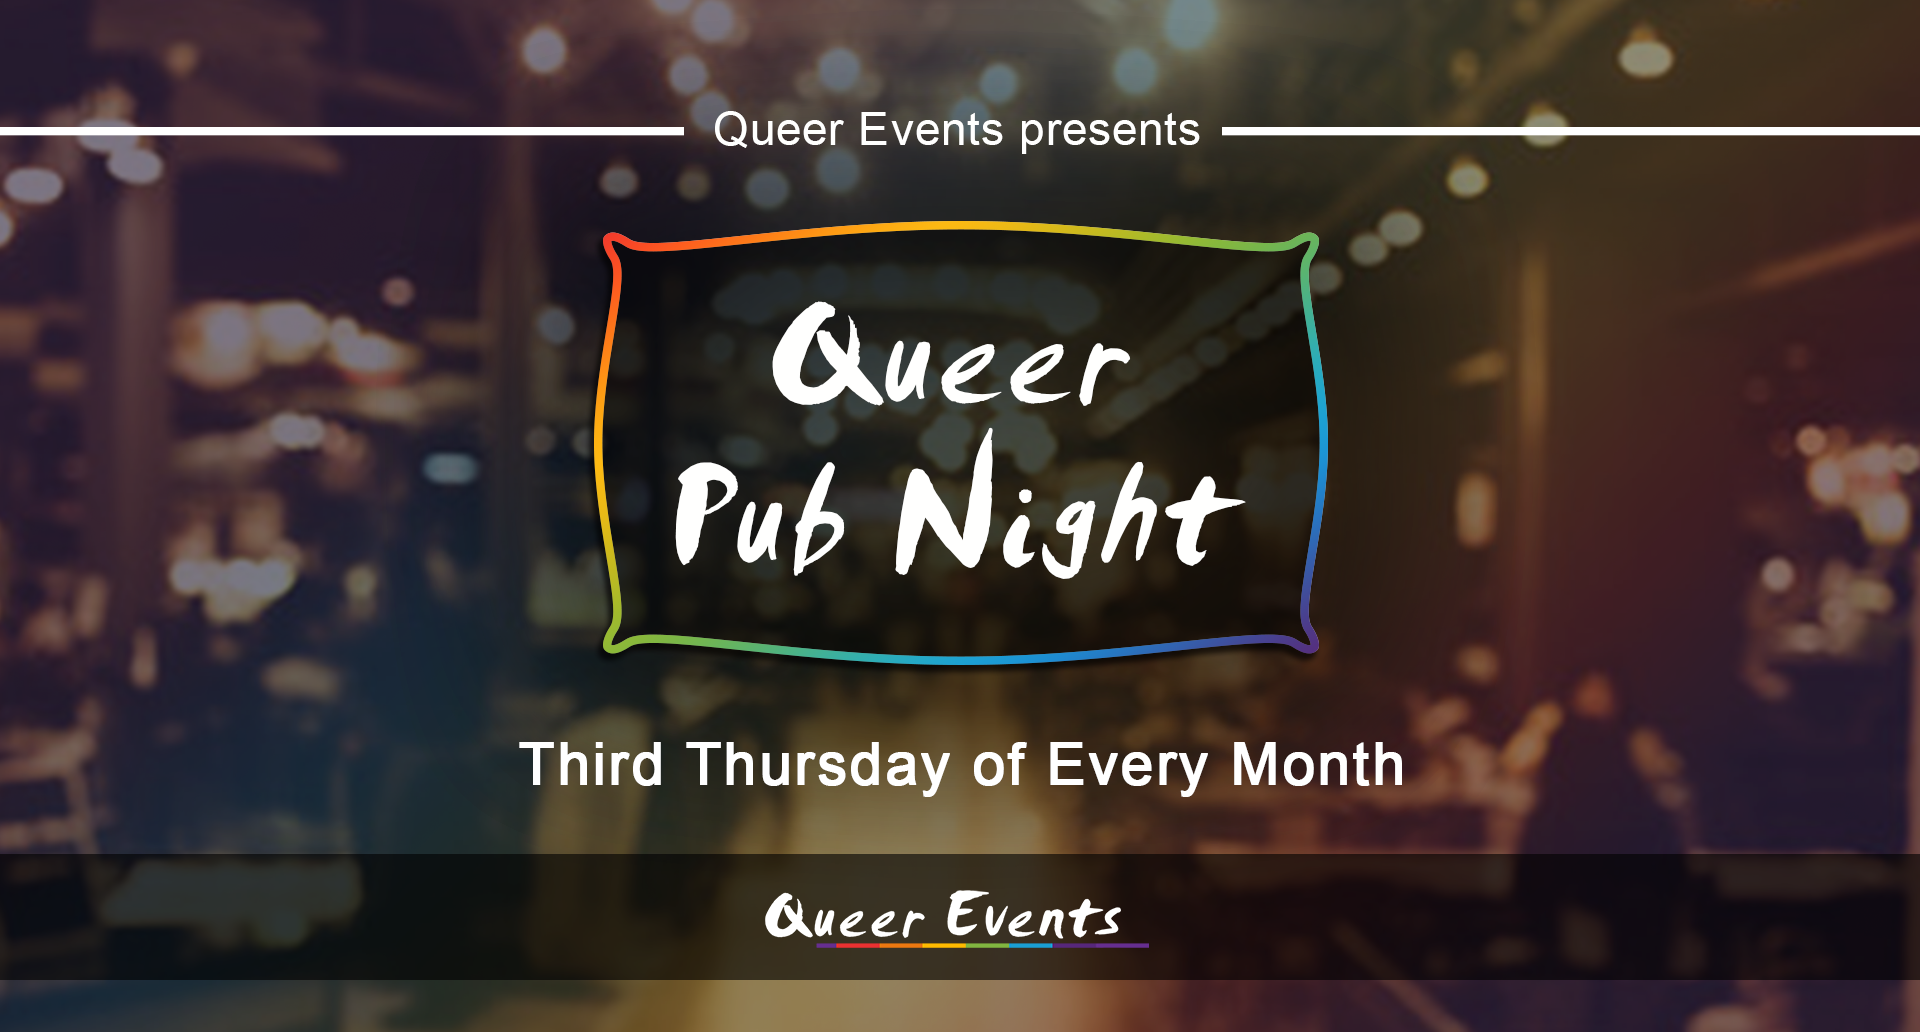 QueerEvents.ca - London Event Listing - Queer Pub Night presented by Queer Events